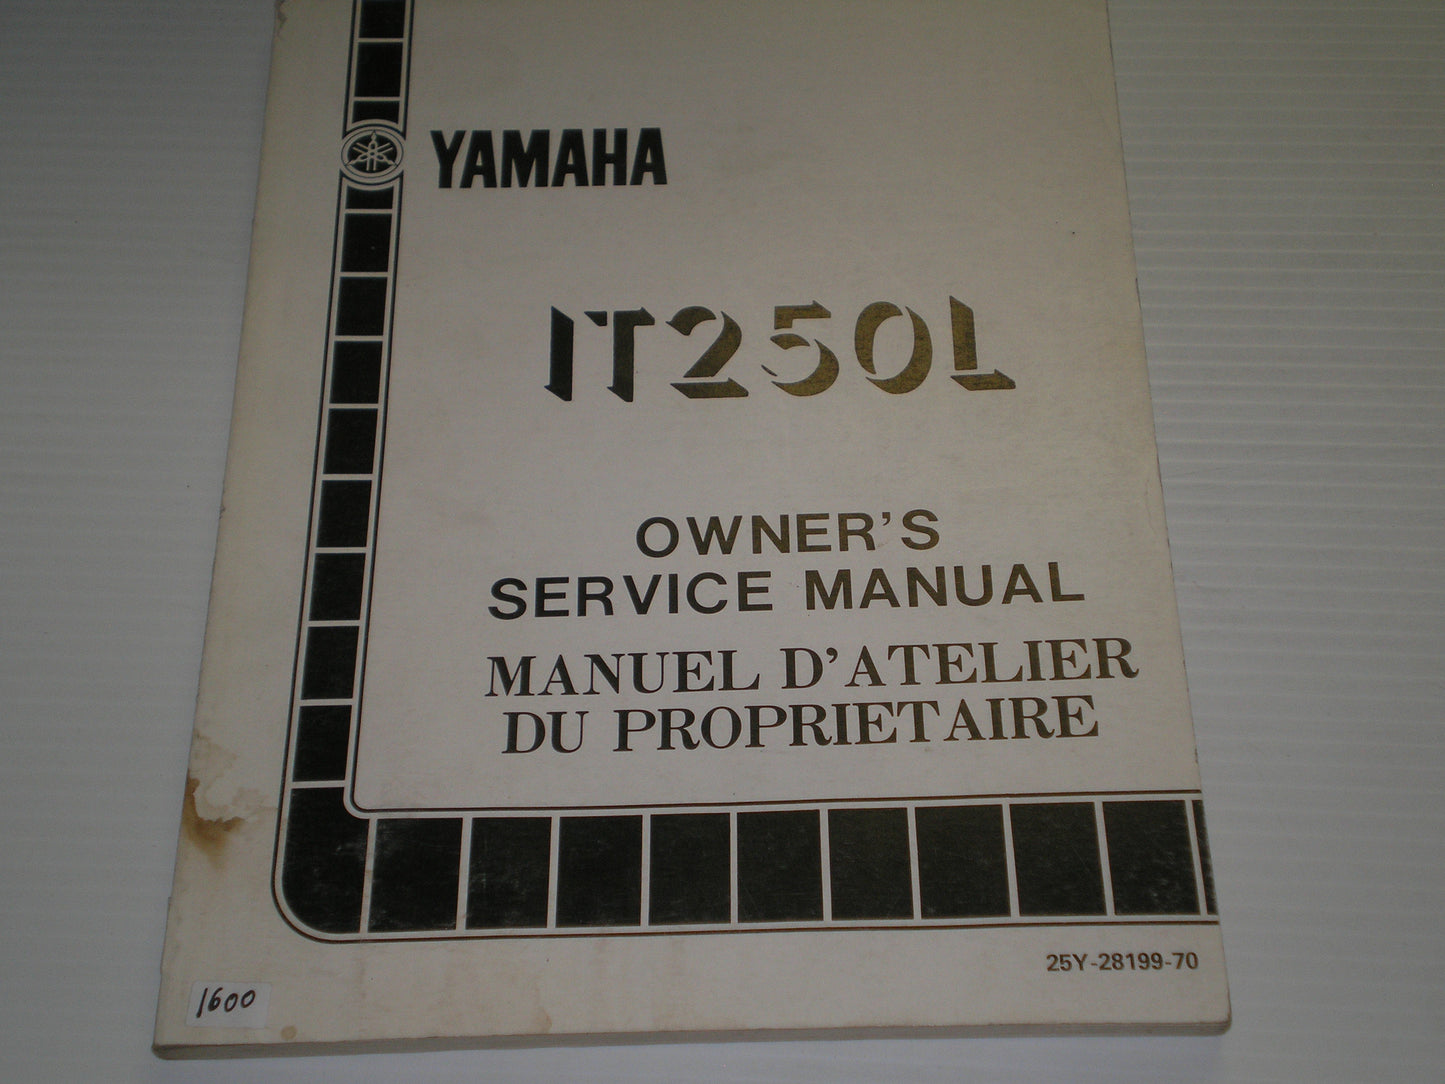 YAMAHA IT250 L  Owner's Service Manual  25Y-28199-70  #1600